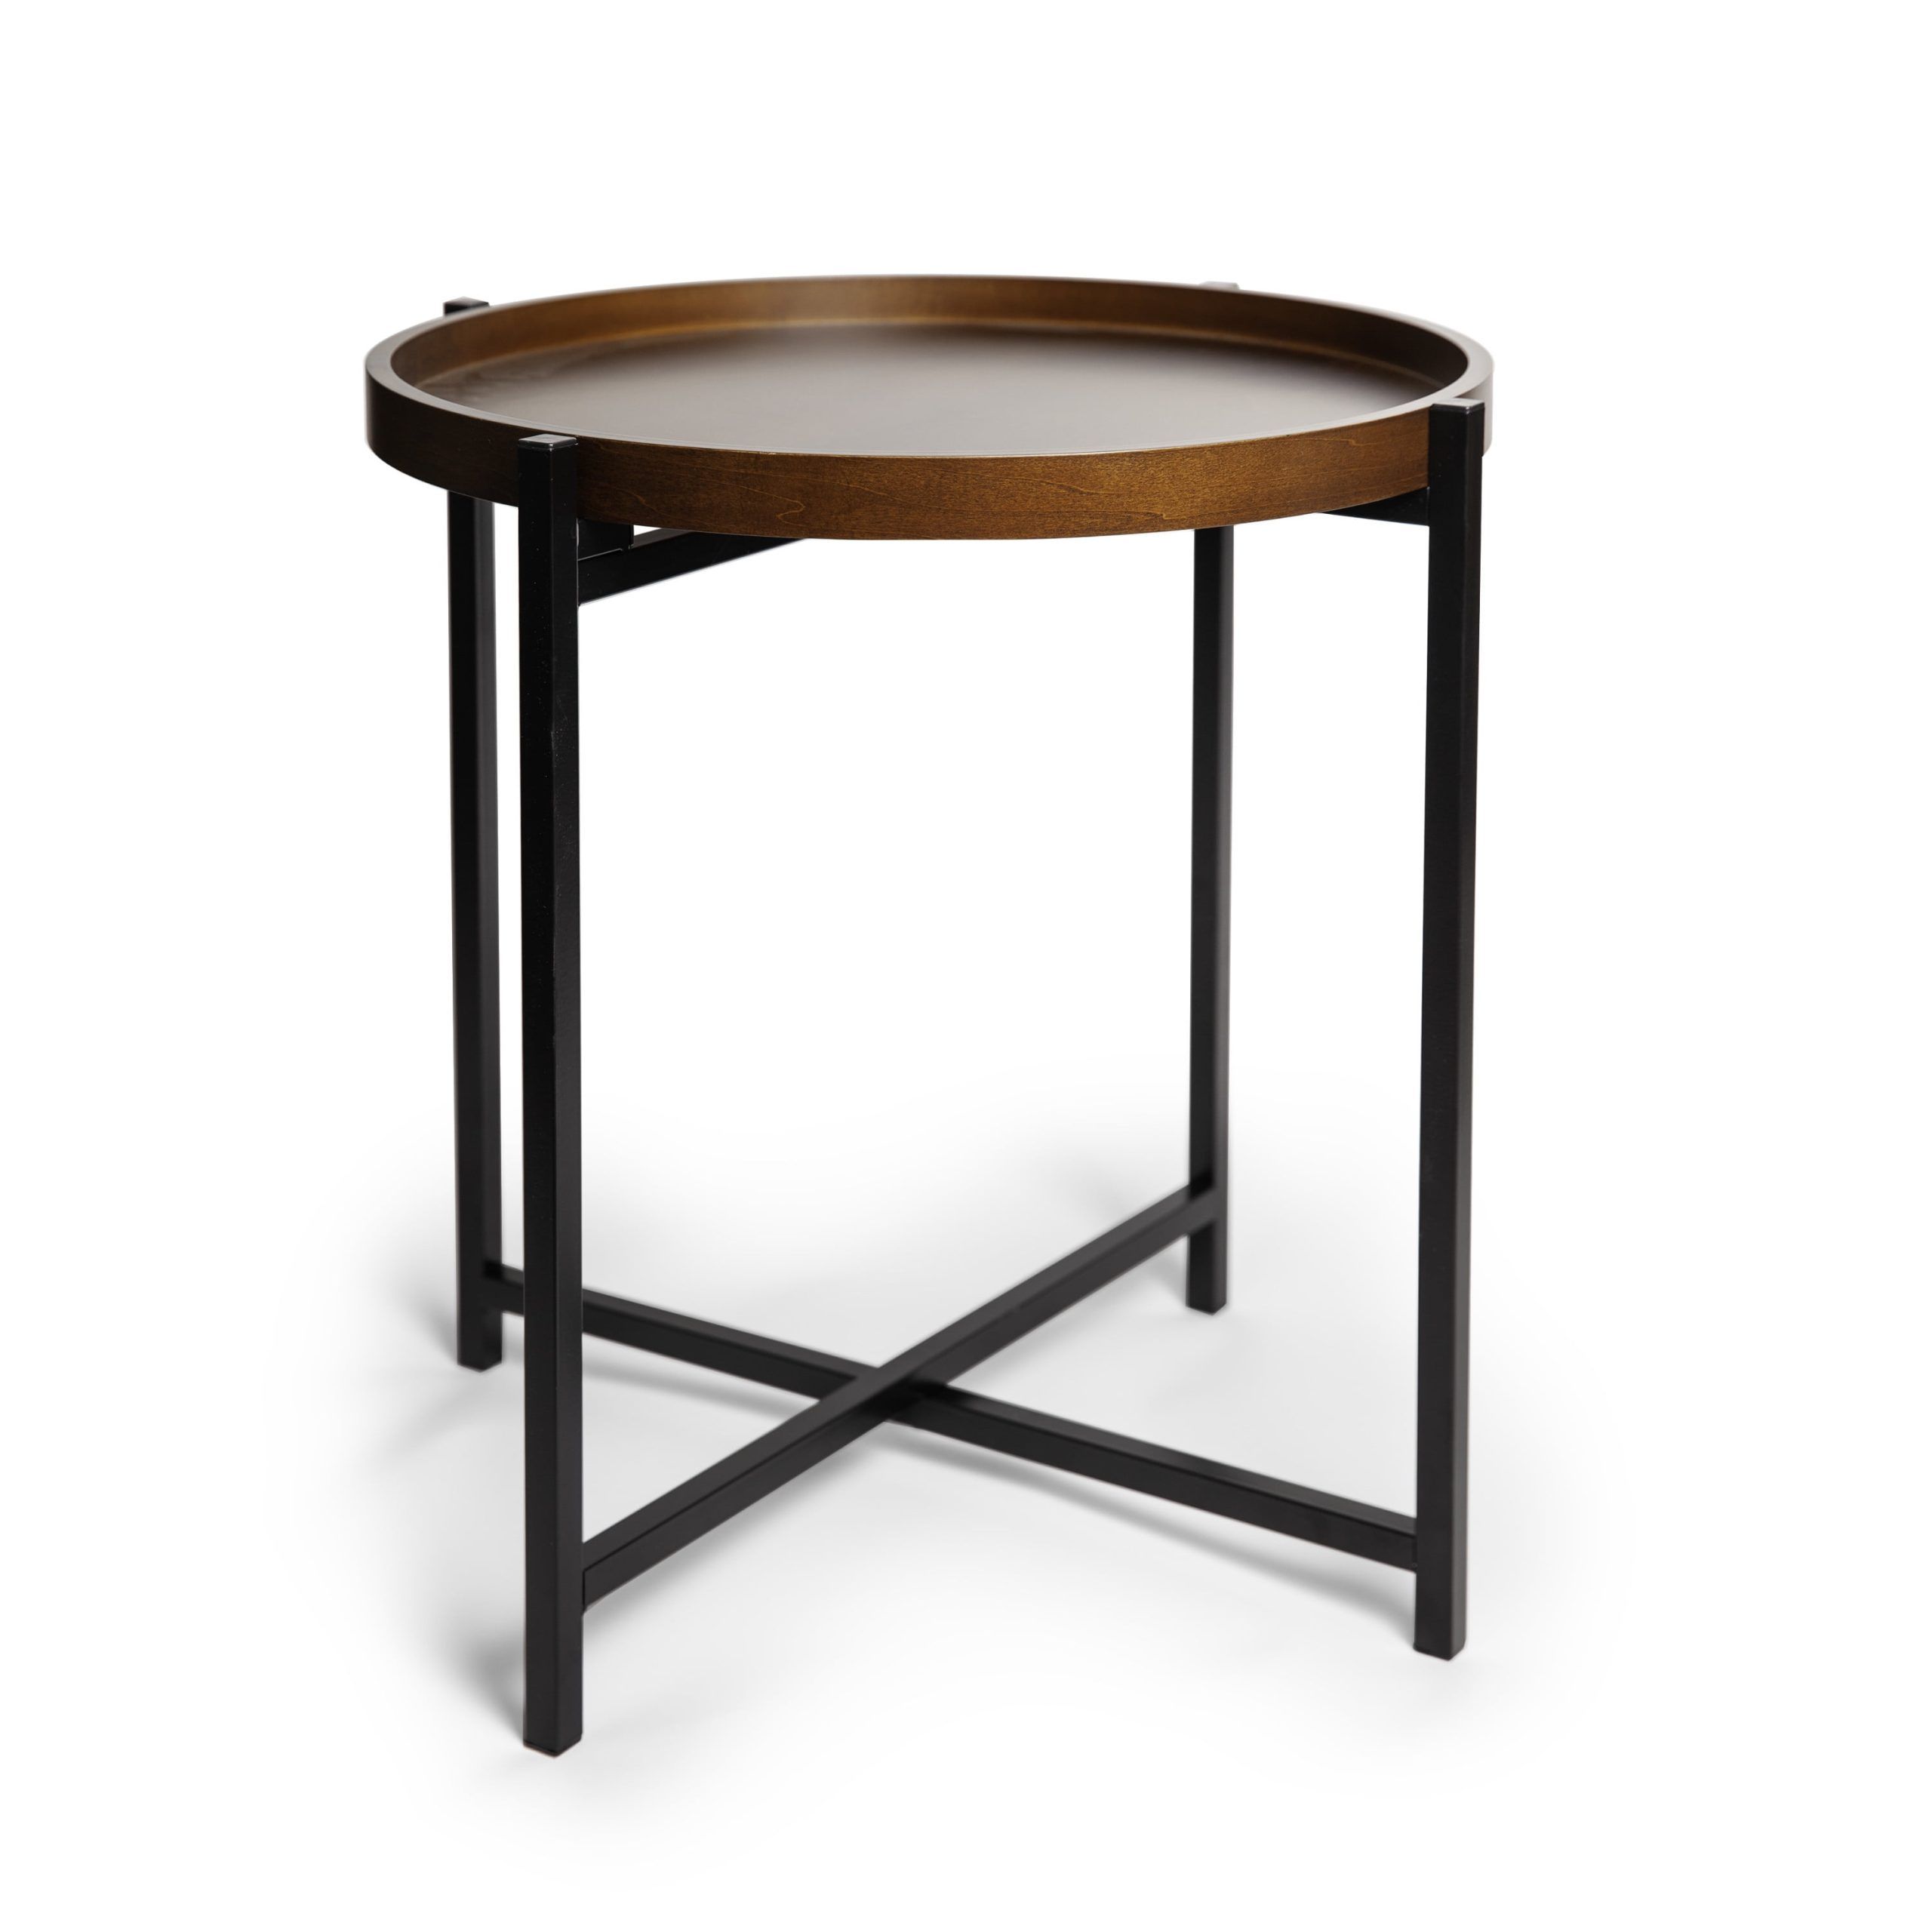 Widely Used Detachable Tray Coffee Tables Pertaining To Mid Century Modern Round Side Table With Removable Wood Tray – Walmart (Photo 11 of 15)